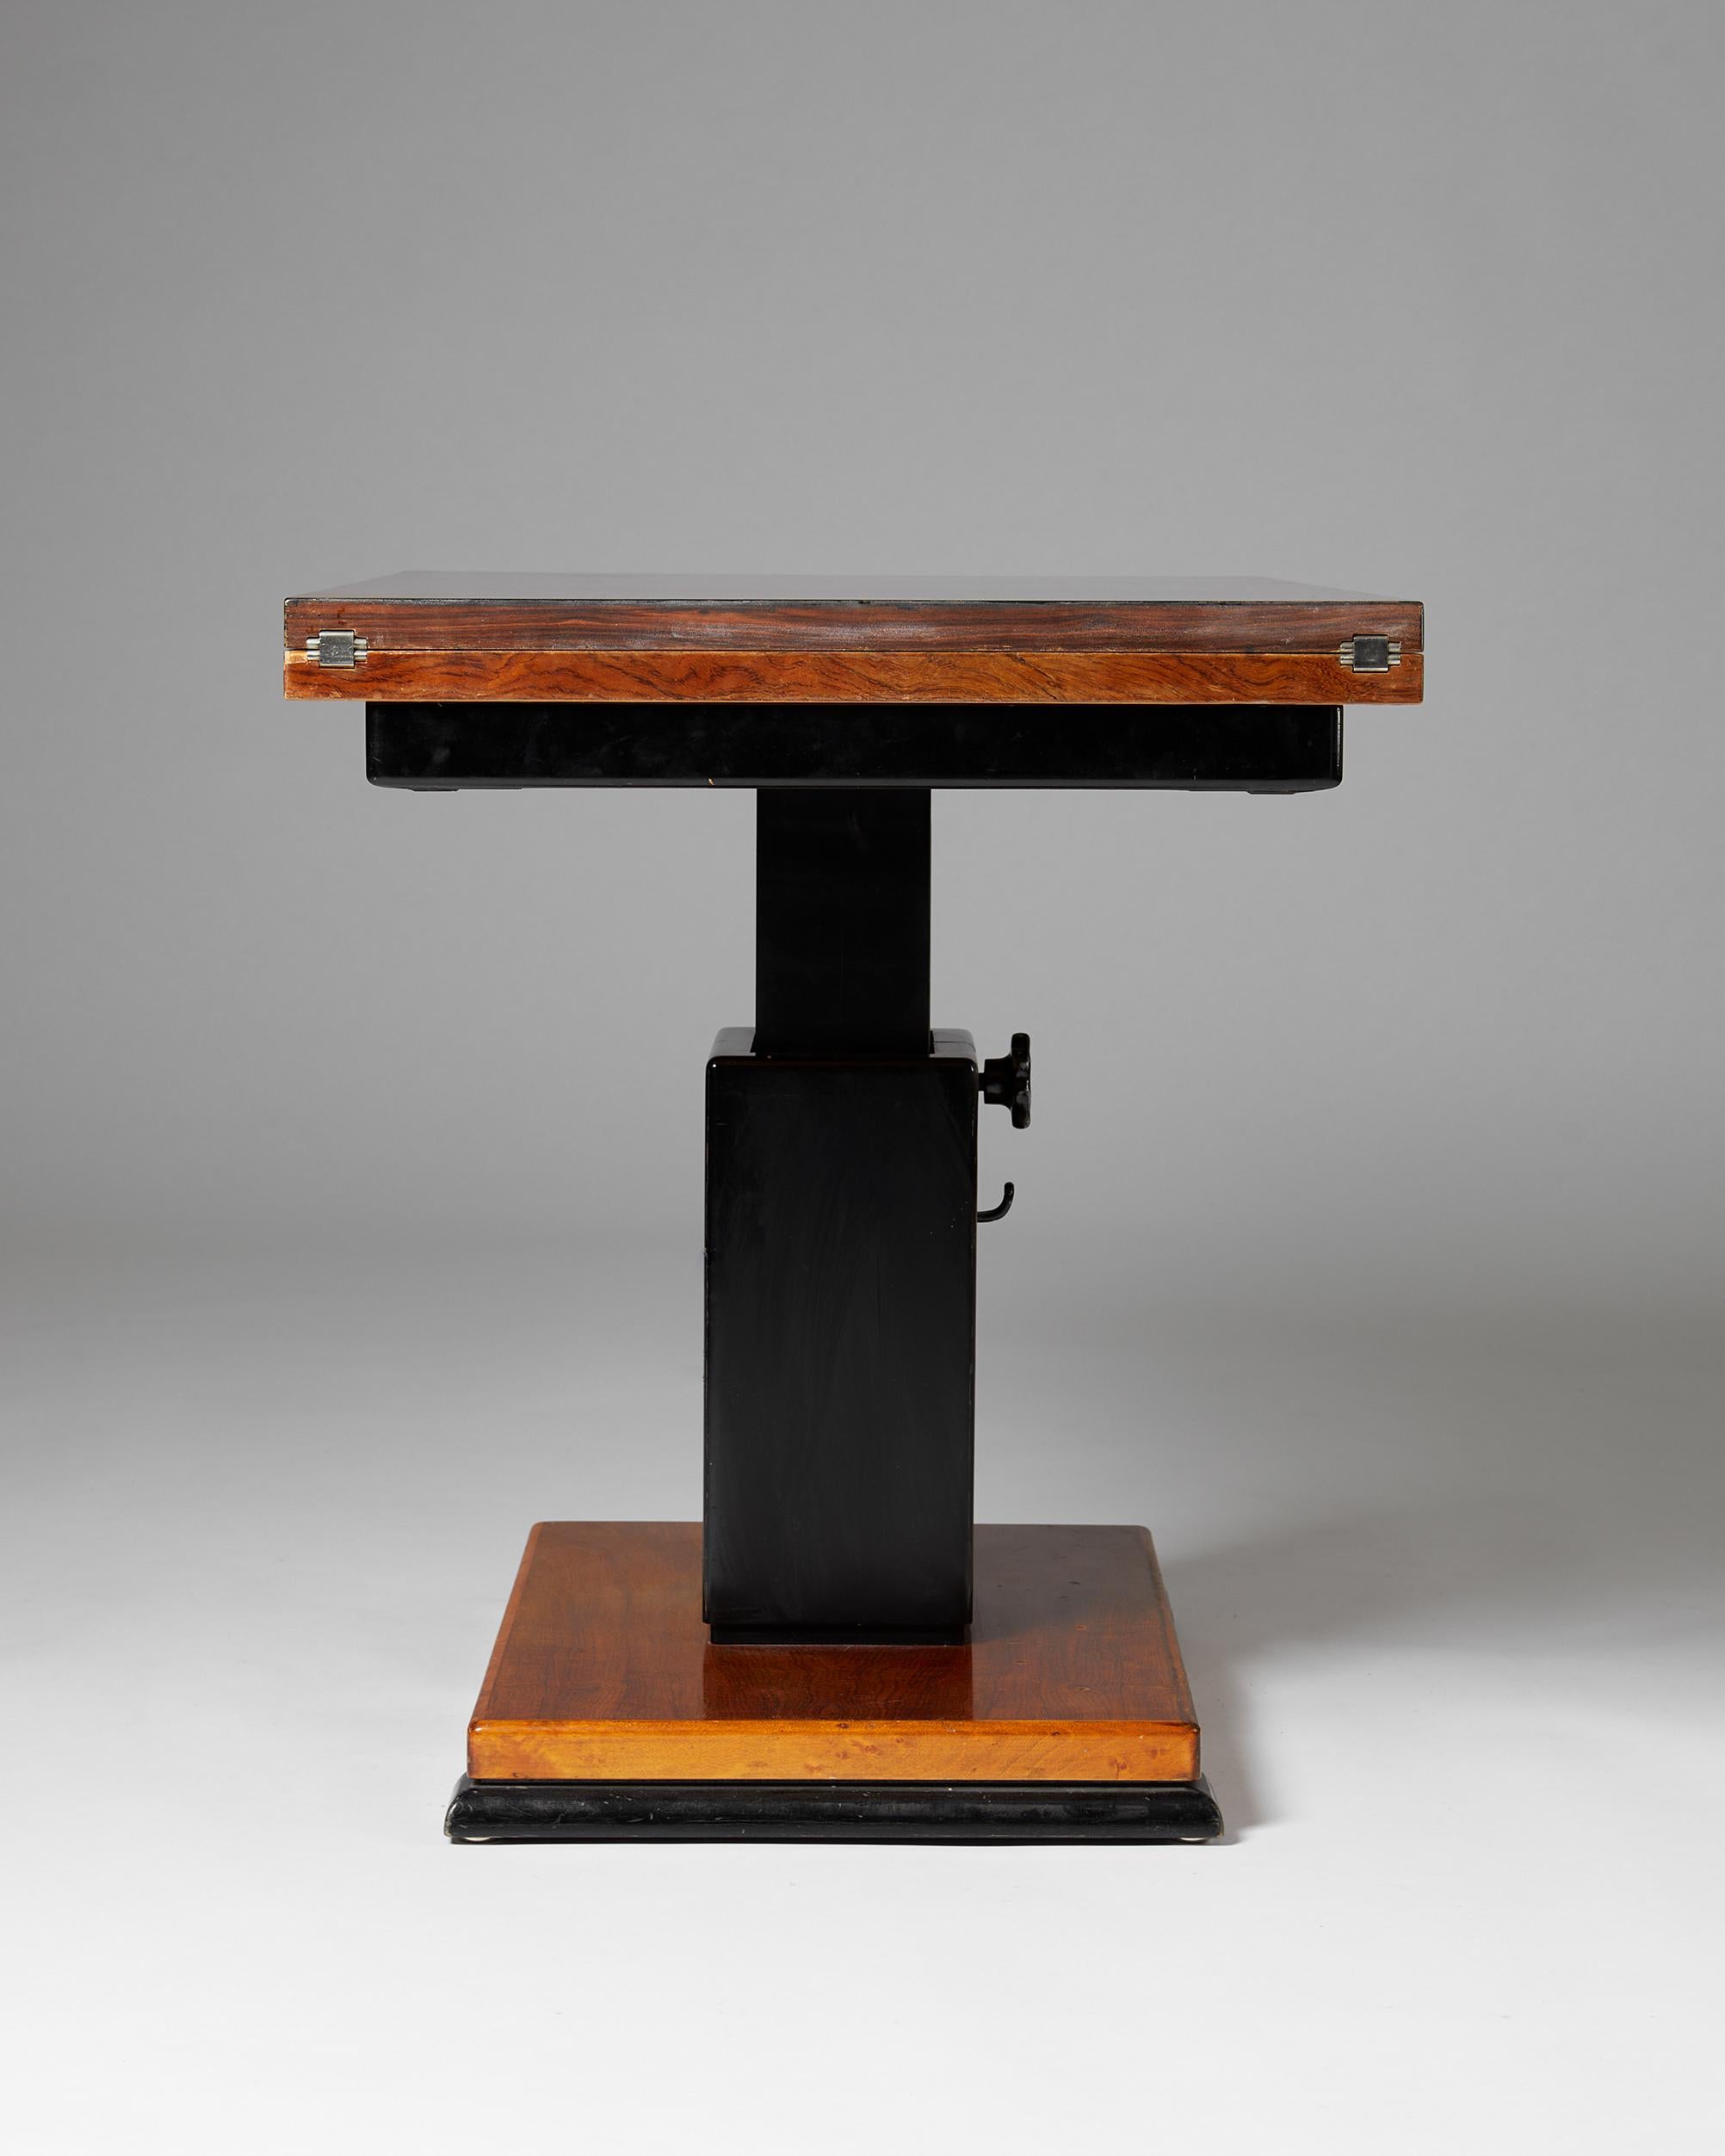 Rosewood Occasional Table “the Ideal Table” Designed by Otto Wretling, Sweden, 1930s